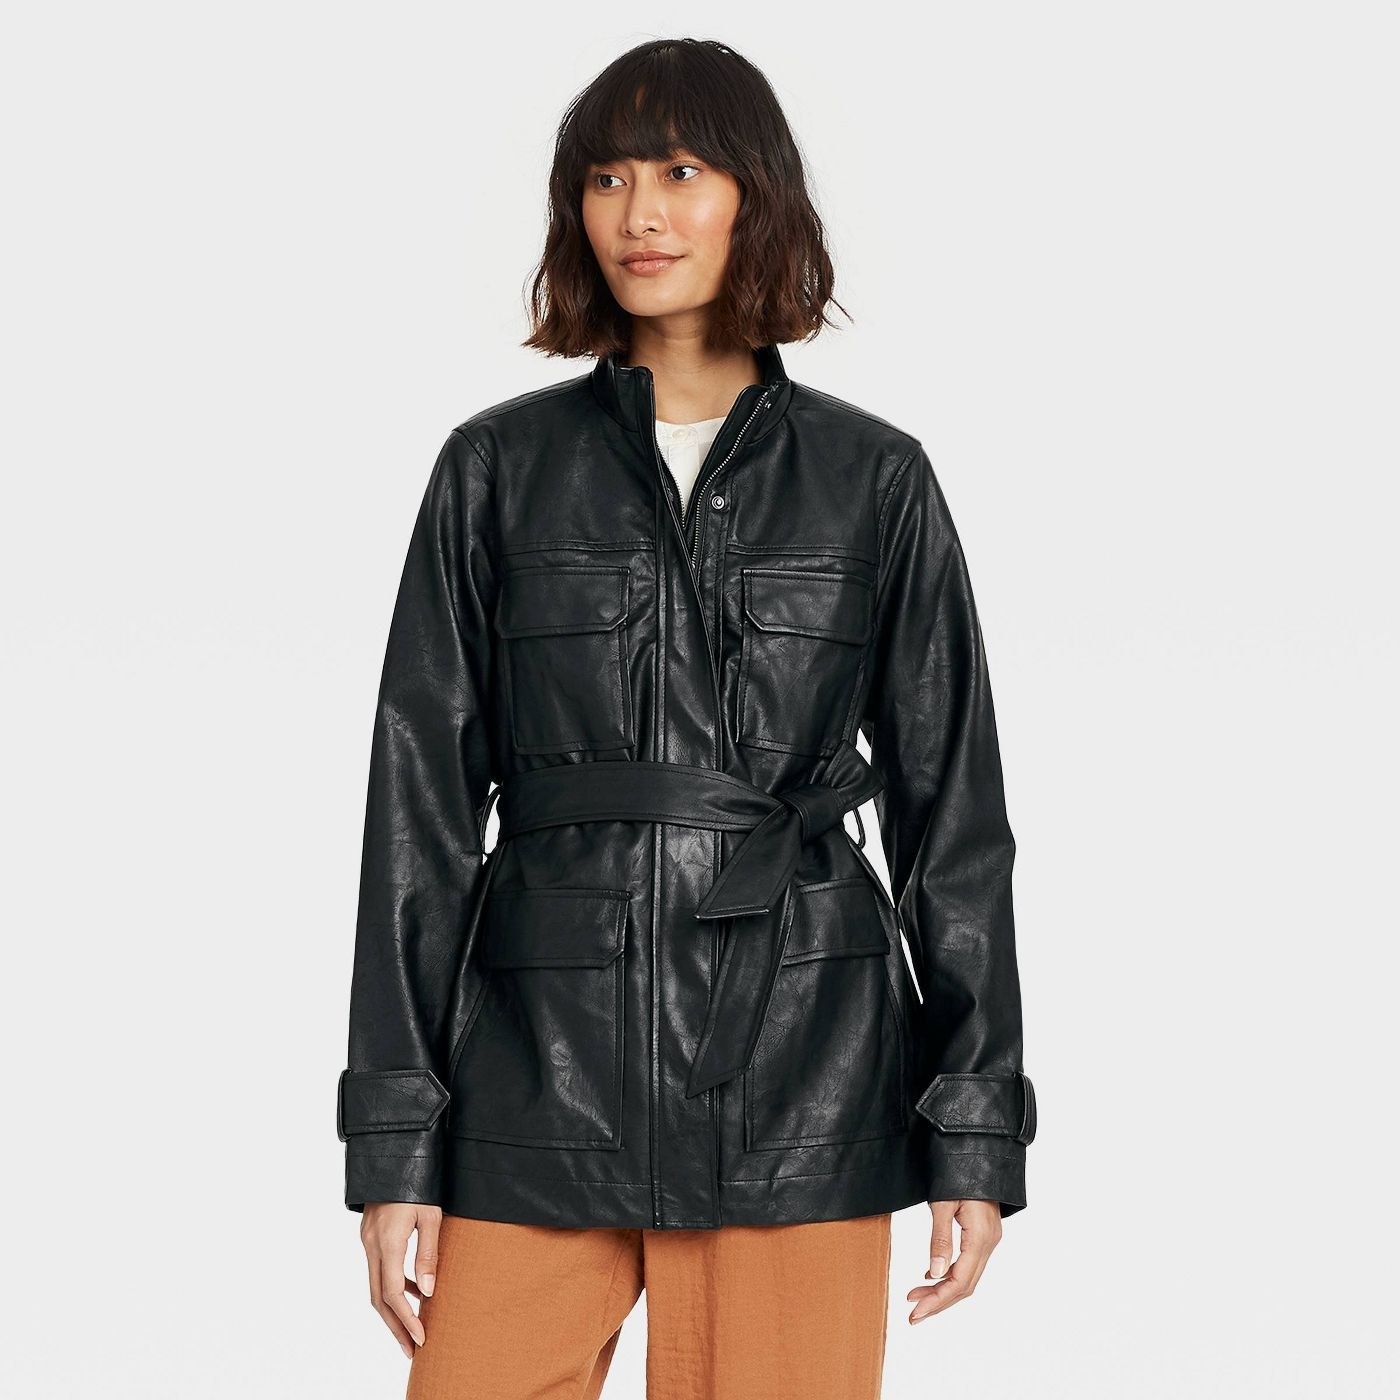 Model wearing the faux leather anorak jacket